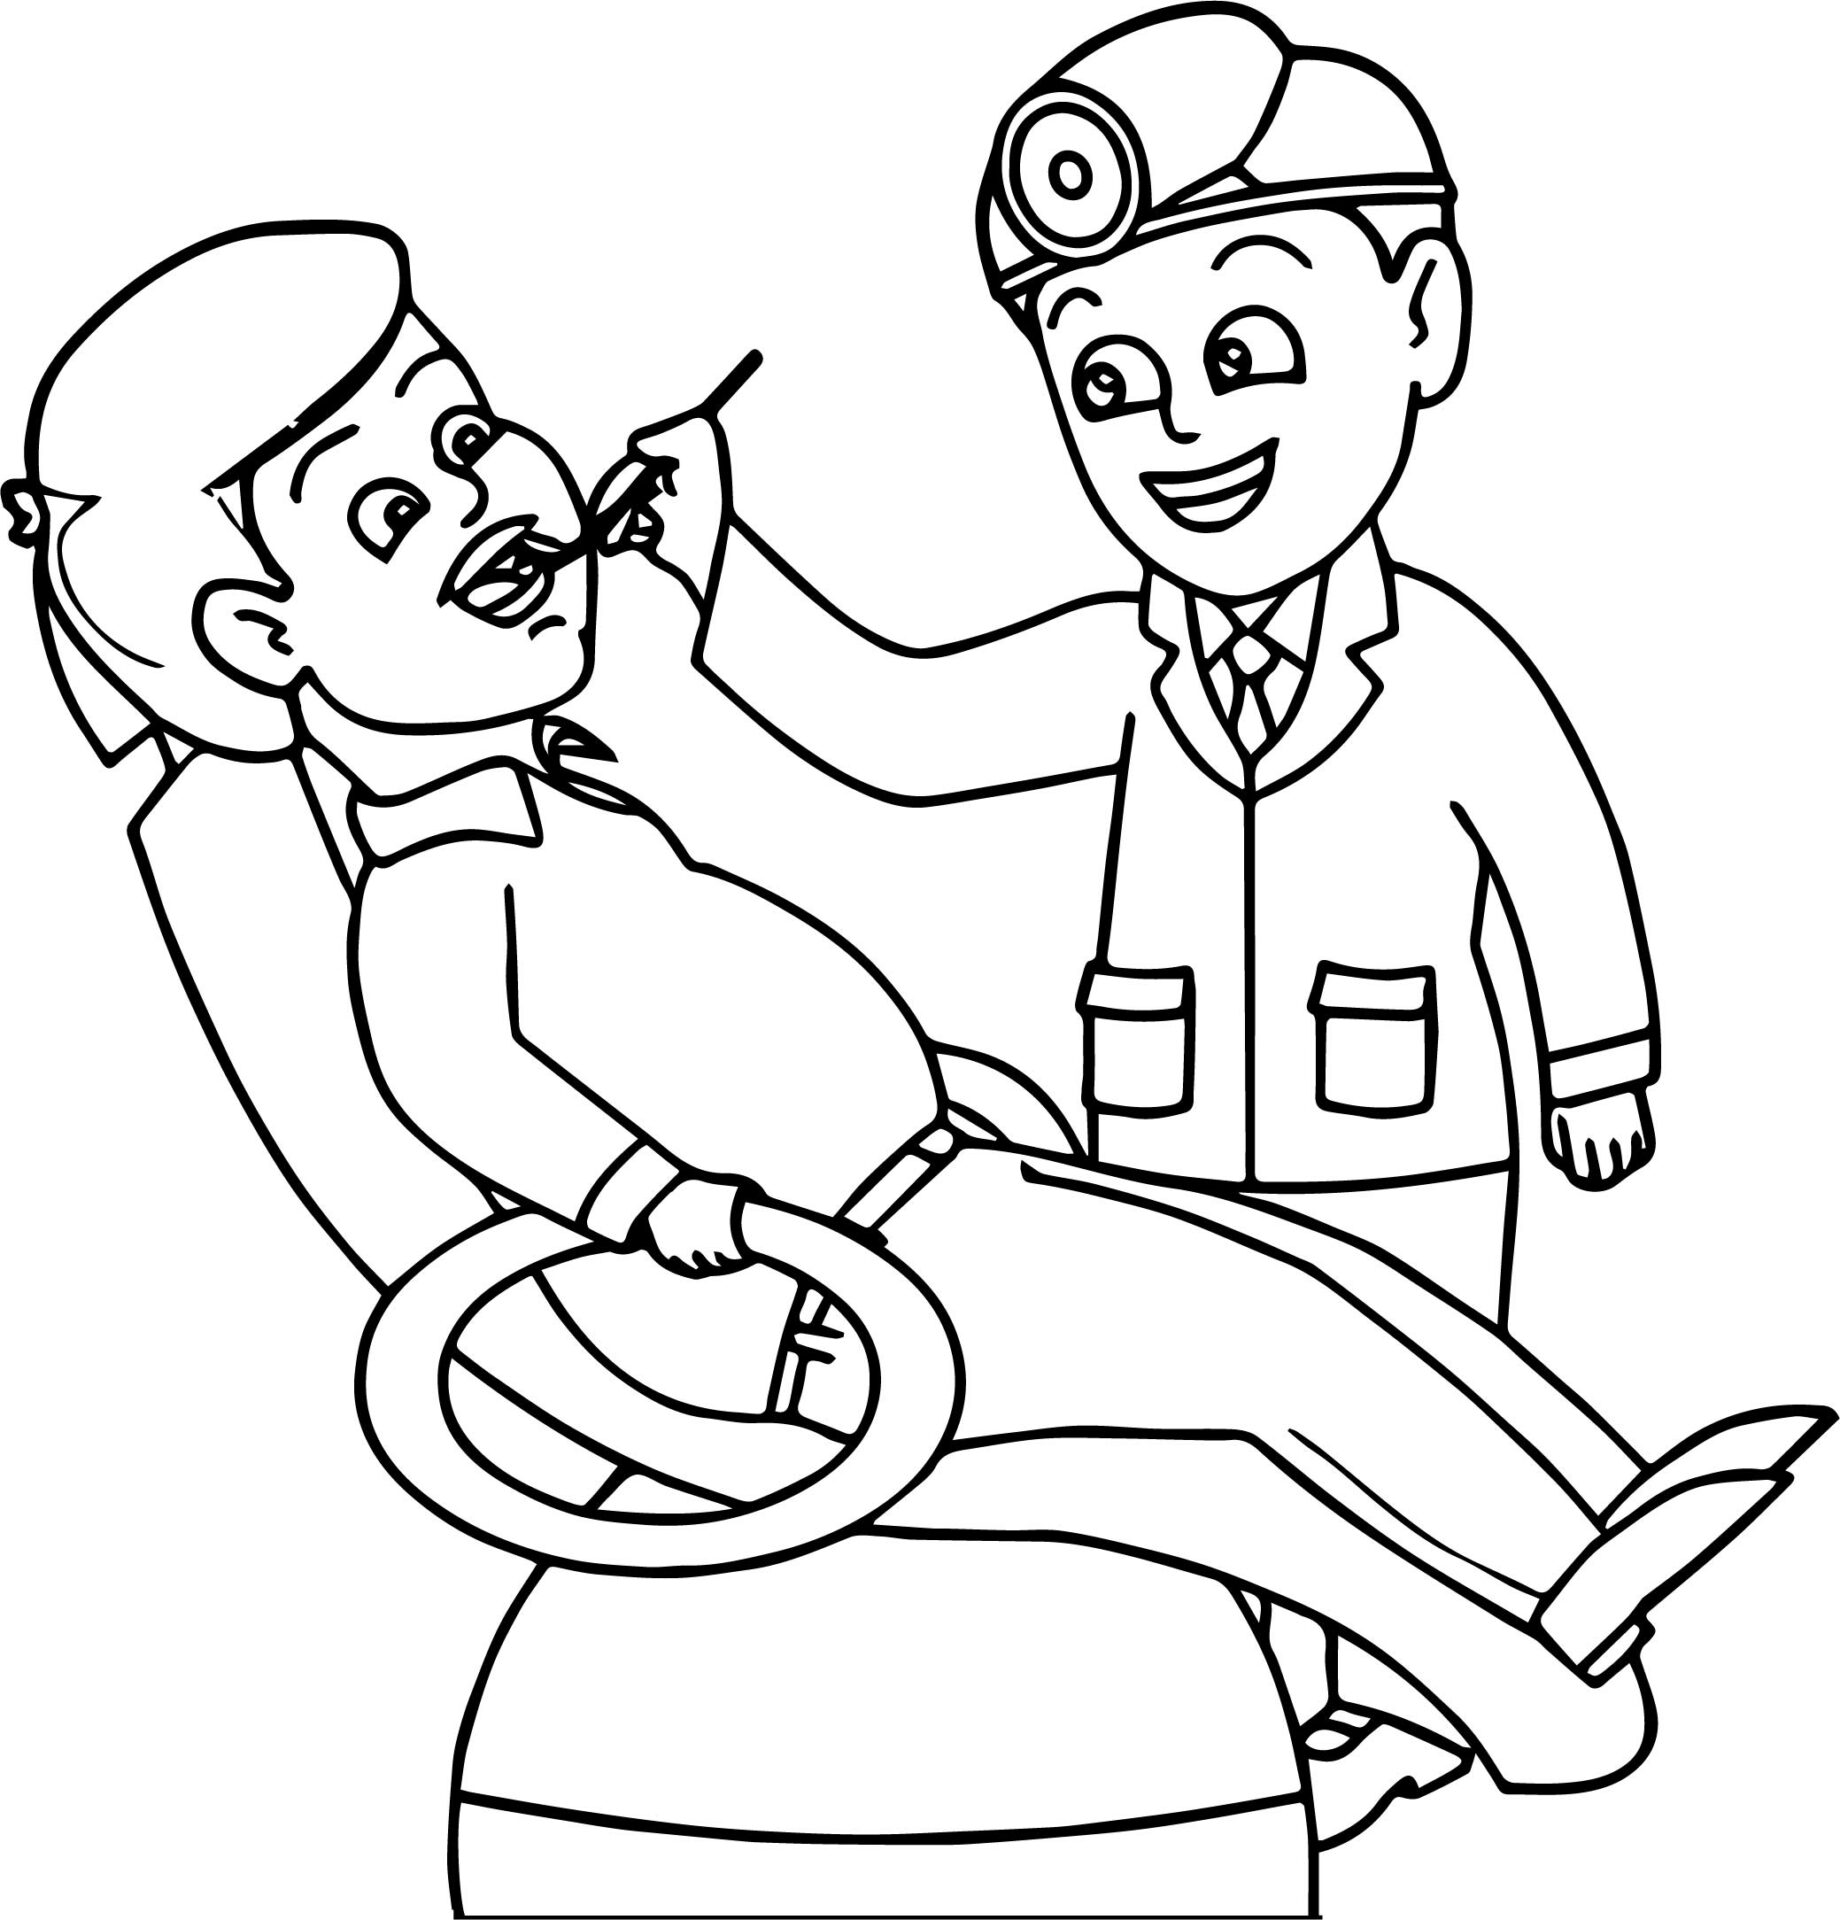 Dentist Coloring Pages Free Printable Coloring Pages for Kids